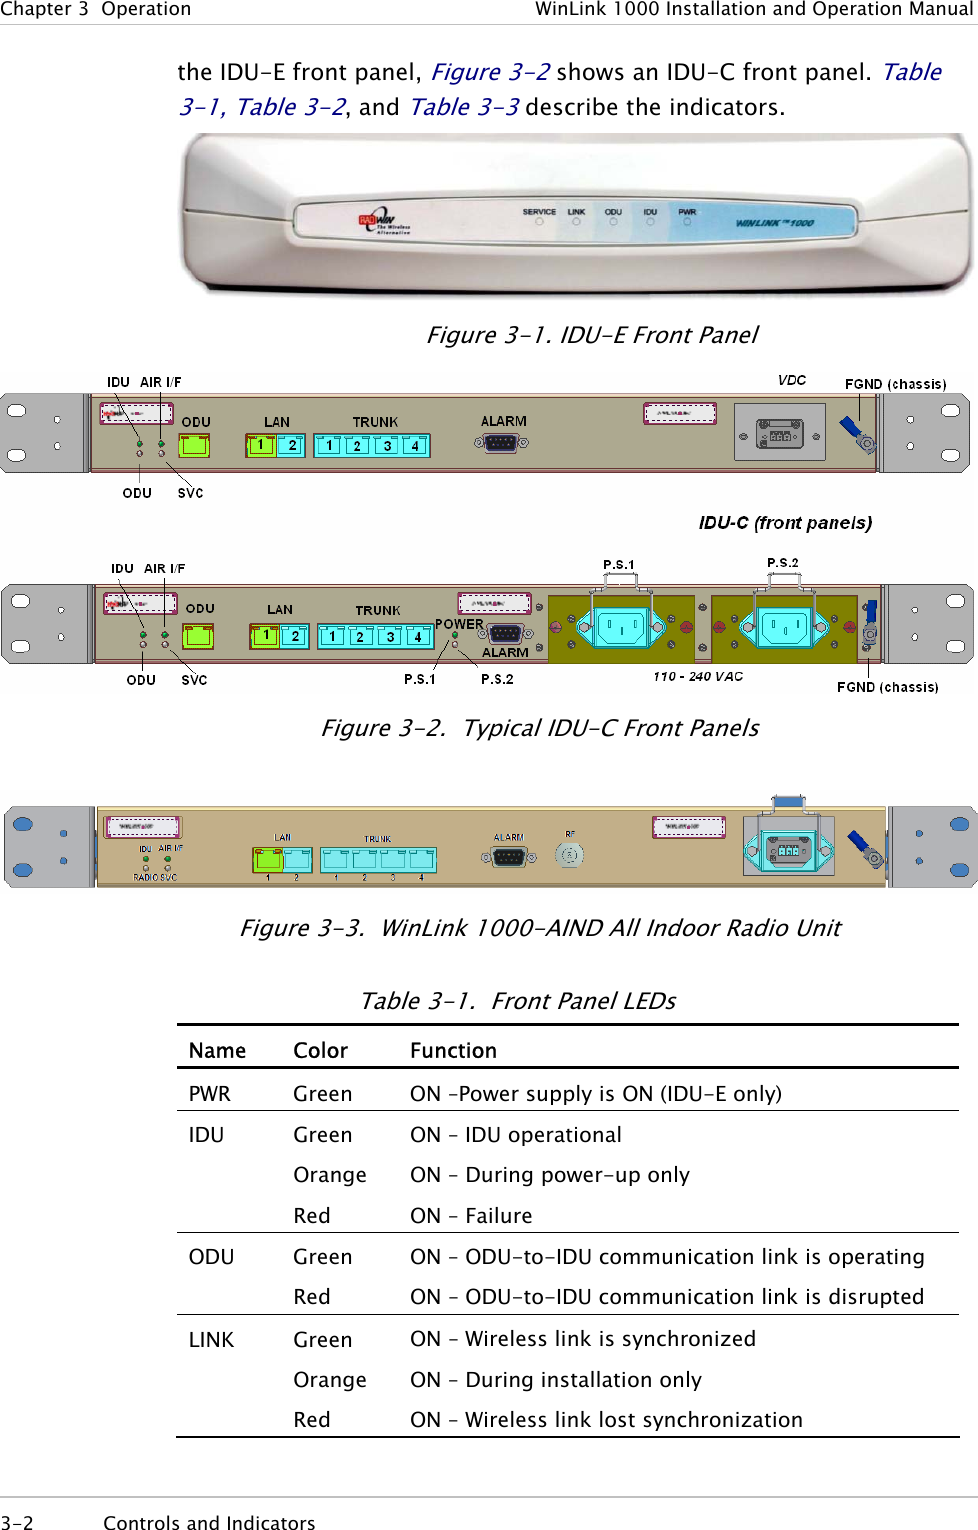 Chapter  3  Operation  WinLink 1000 Installation and Operation Manual the IDU-E front panel, Figure  3-2 shows an IDU-C front panel. Table  3-1, Table  3-2, and Table  3-3 describe the indicators.  Figure  3-1. IDU-E Front Panel  Figure  3-2.  Typical IDU-C Front Panels  Figure  3-3.  WinLink 1000-AIND All Indoor Radio Unit Table  3-1.  Front Panel LEDs Name Color  Function PWR  Green  ON –Power supply is ON (IDU-E only) IDU Green Orange Red ON – IDU operational ON – During power-up only ON – Failure ODU Green Red ON – ODU-to-IDU communication link is operating ON – ODU-to-IDU communication link is disrupted  LINK Green Orange Red ON – Wireless link is synchronized ON – During installation only ON – Wireless link lost synchronization 3-2 Controls and Indicators  